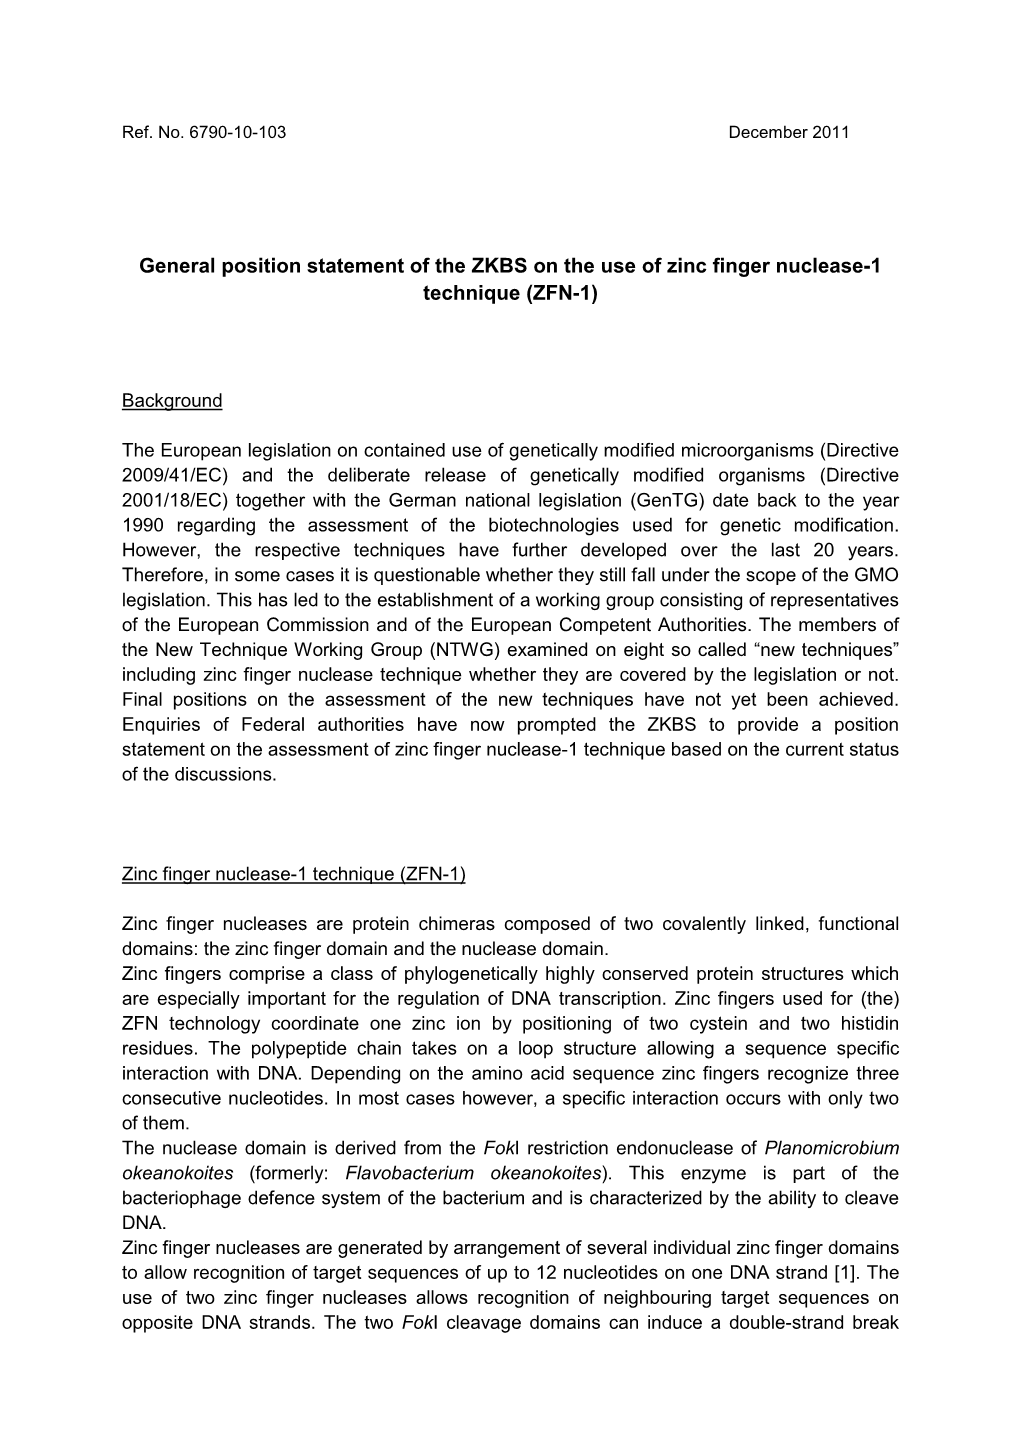 General Position Statement of the ZKBS on the Use of Zinc Finger Nuclease-1 Technique (ZFN-1)